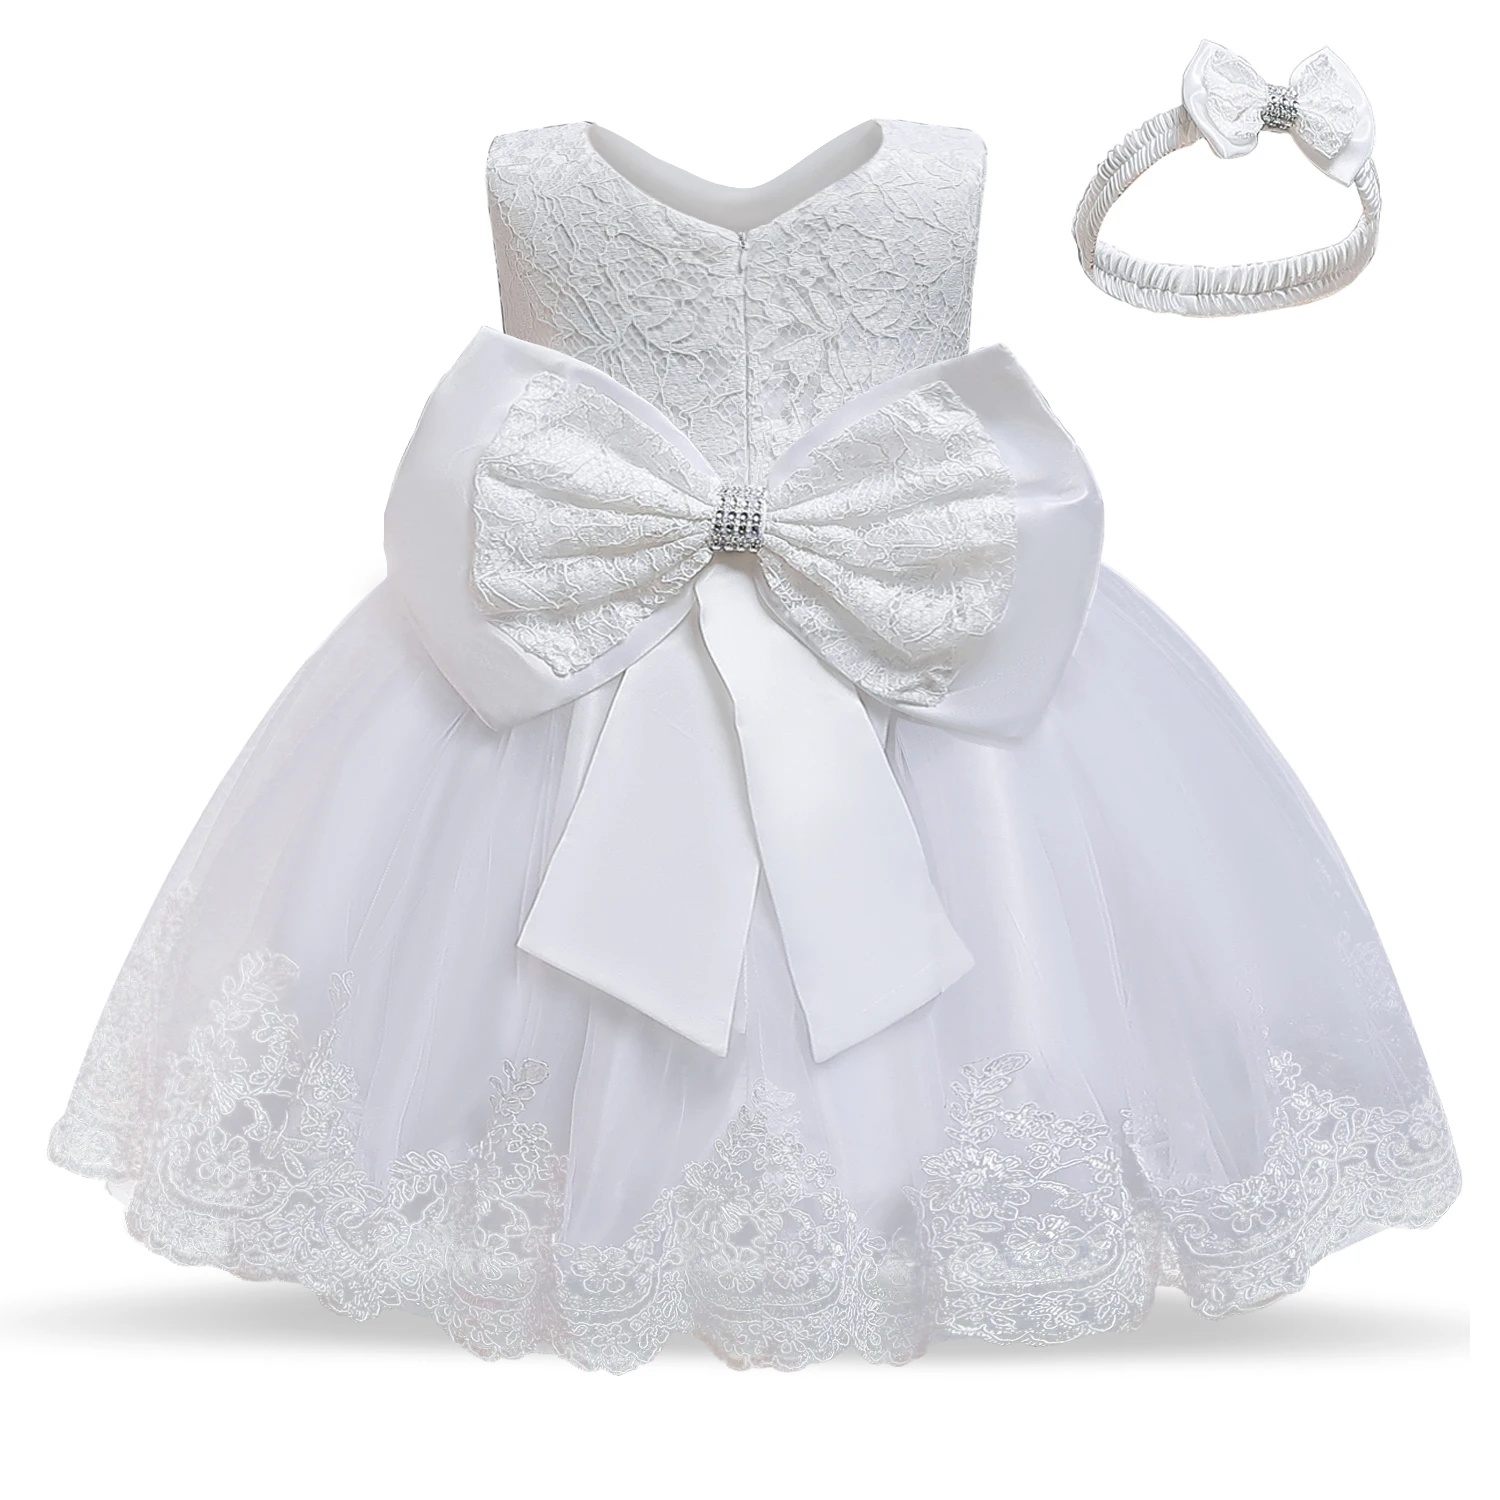 12 Month Cute Baby Lace Floral Big Bow Princess Dress Infant 1st Birthday Party Ball Gown Newbron Kid White Baptism Tutu Costume